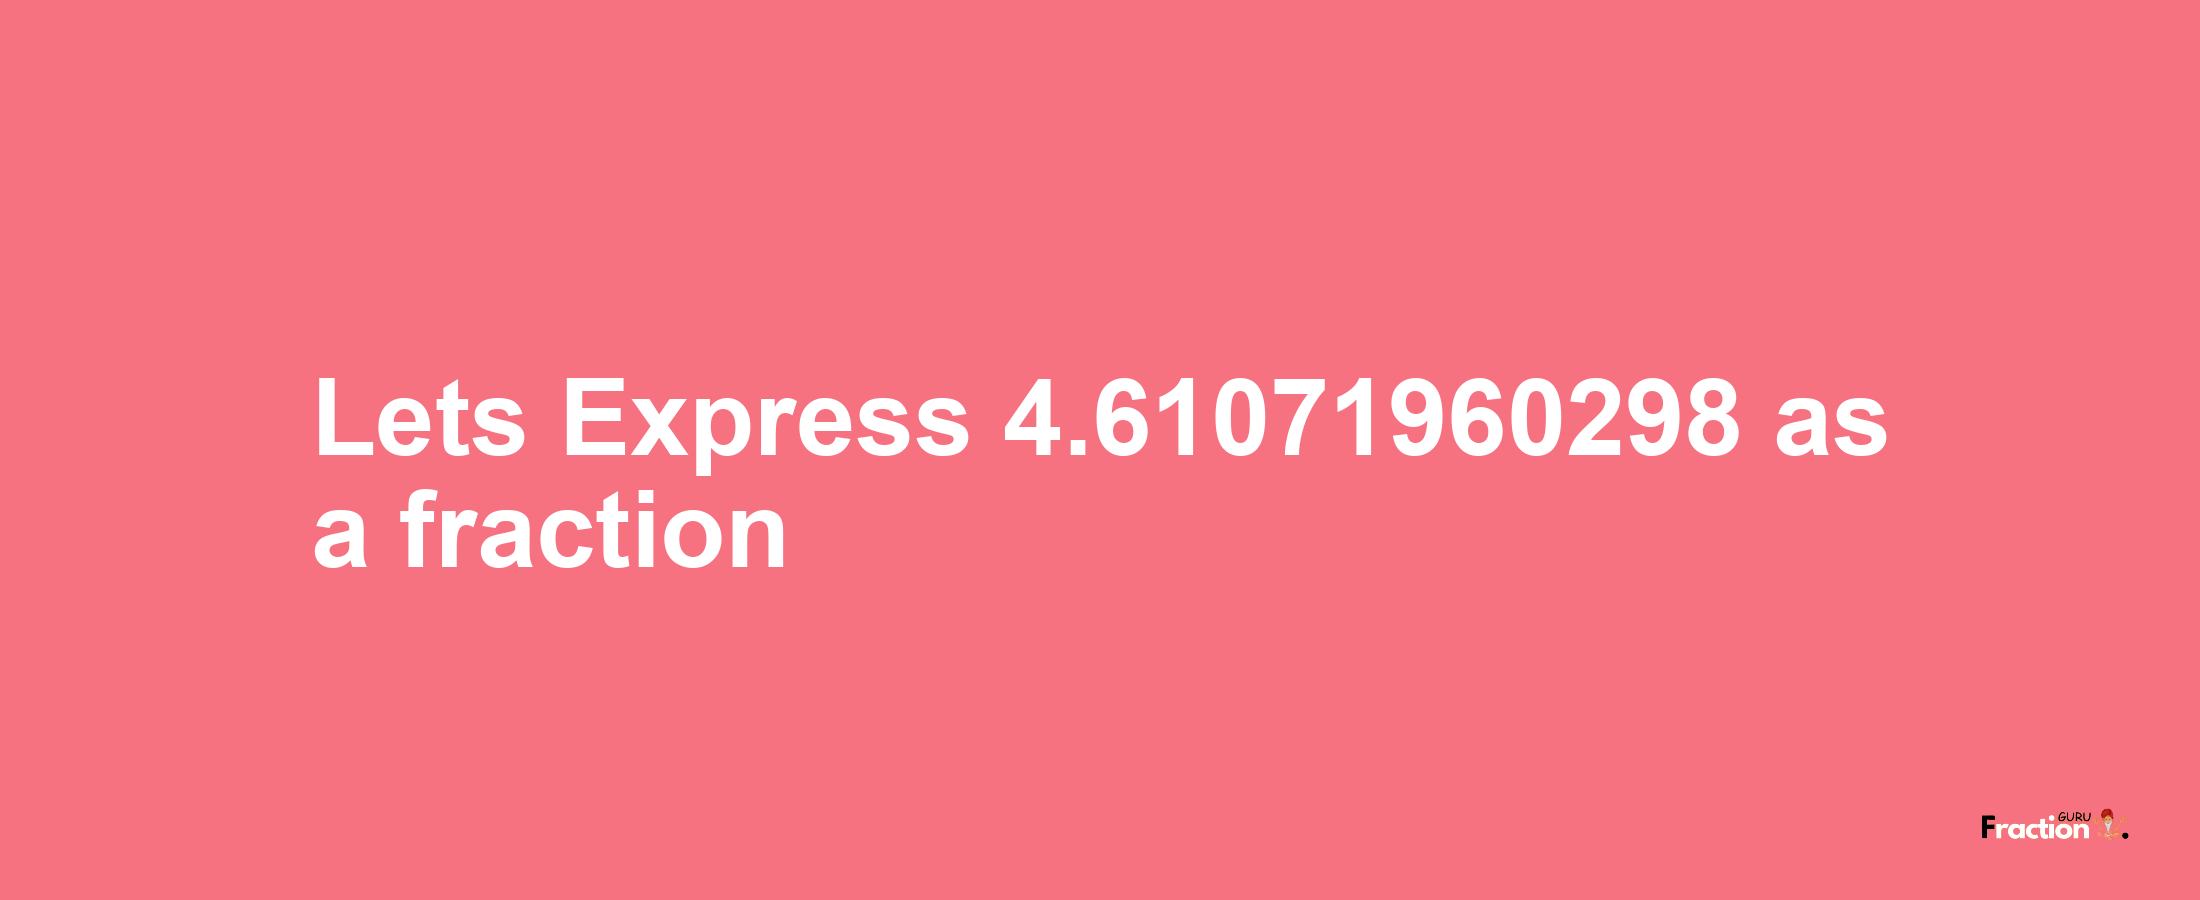 Lets Express 4.61071960298 as afraction